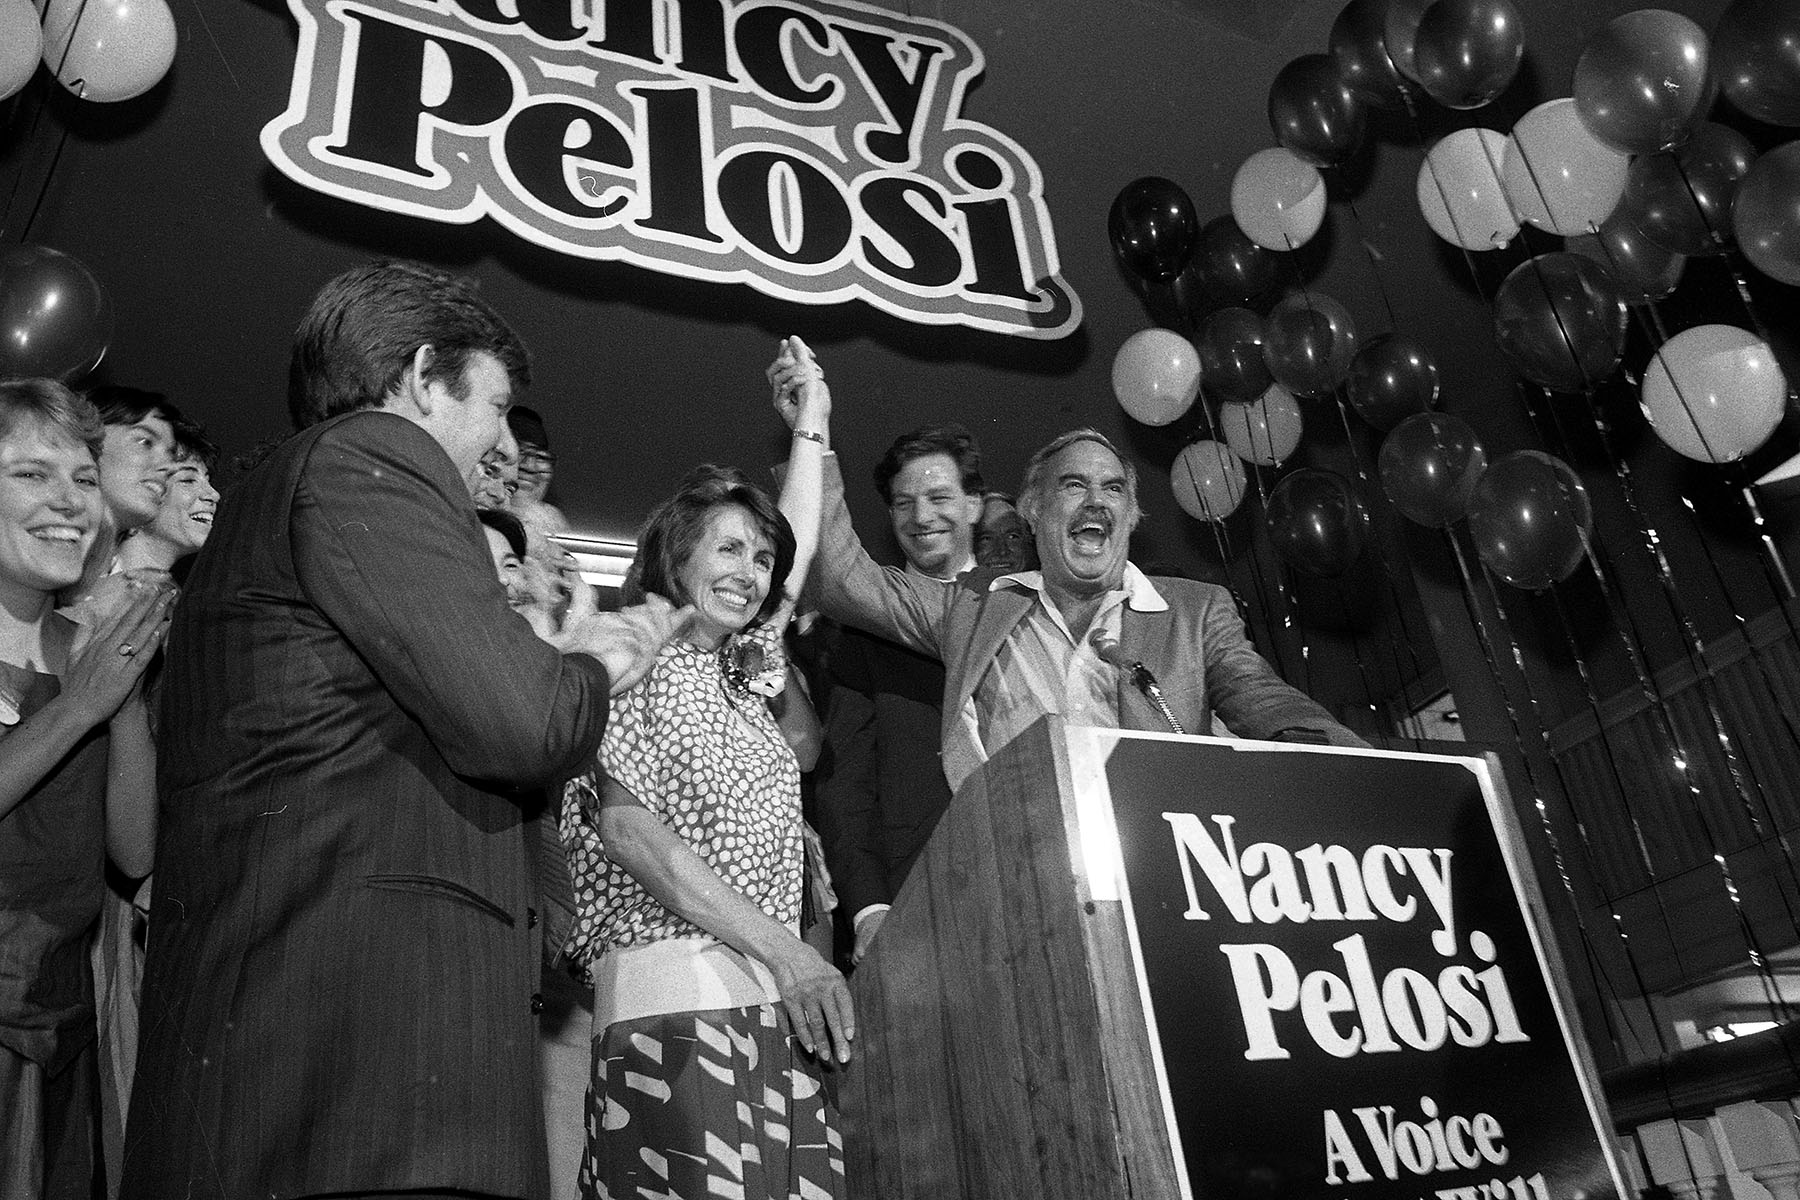 Nancy Pelosi raises her fist from a podium. Supporters clap and cheer around her.